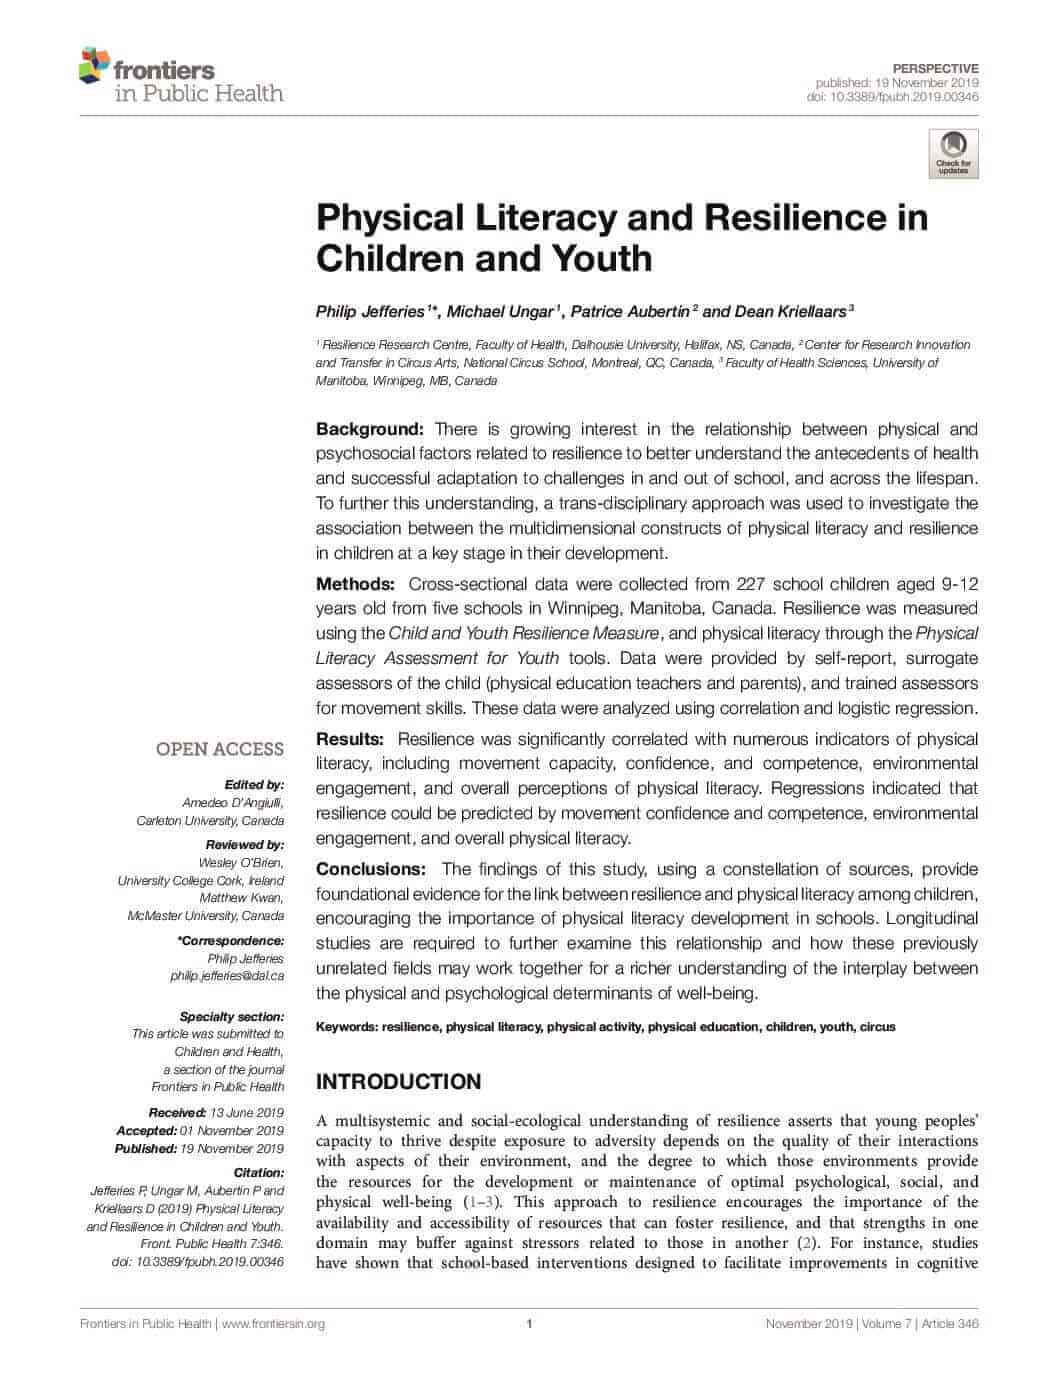 Resilience and Physical Literacy in Children and Youth